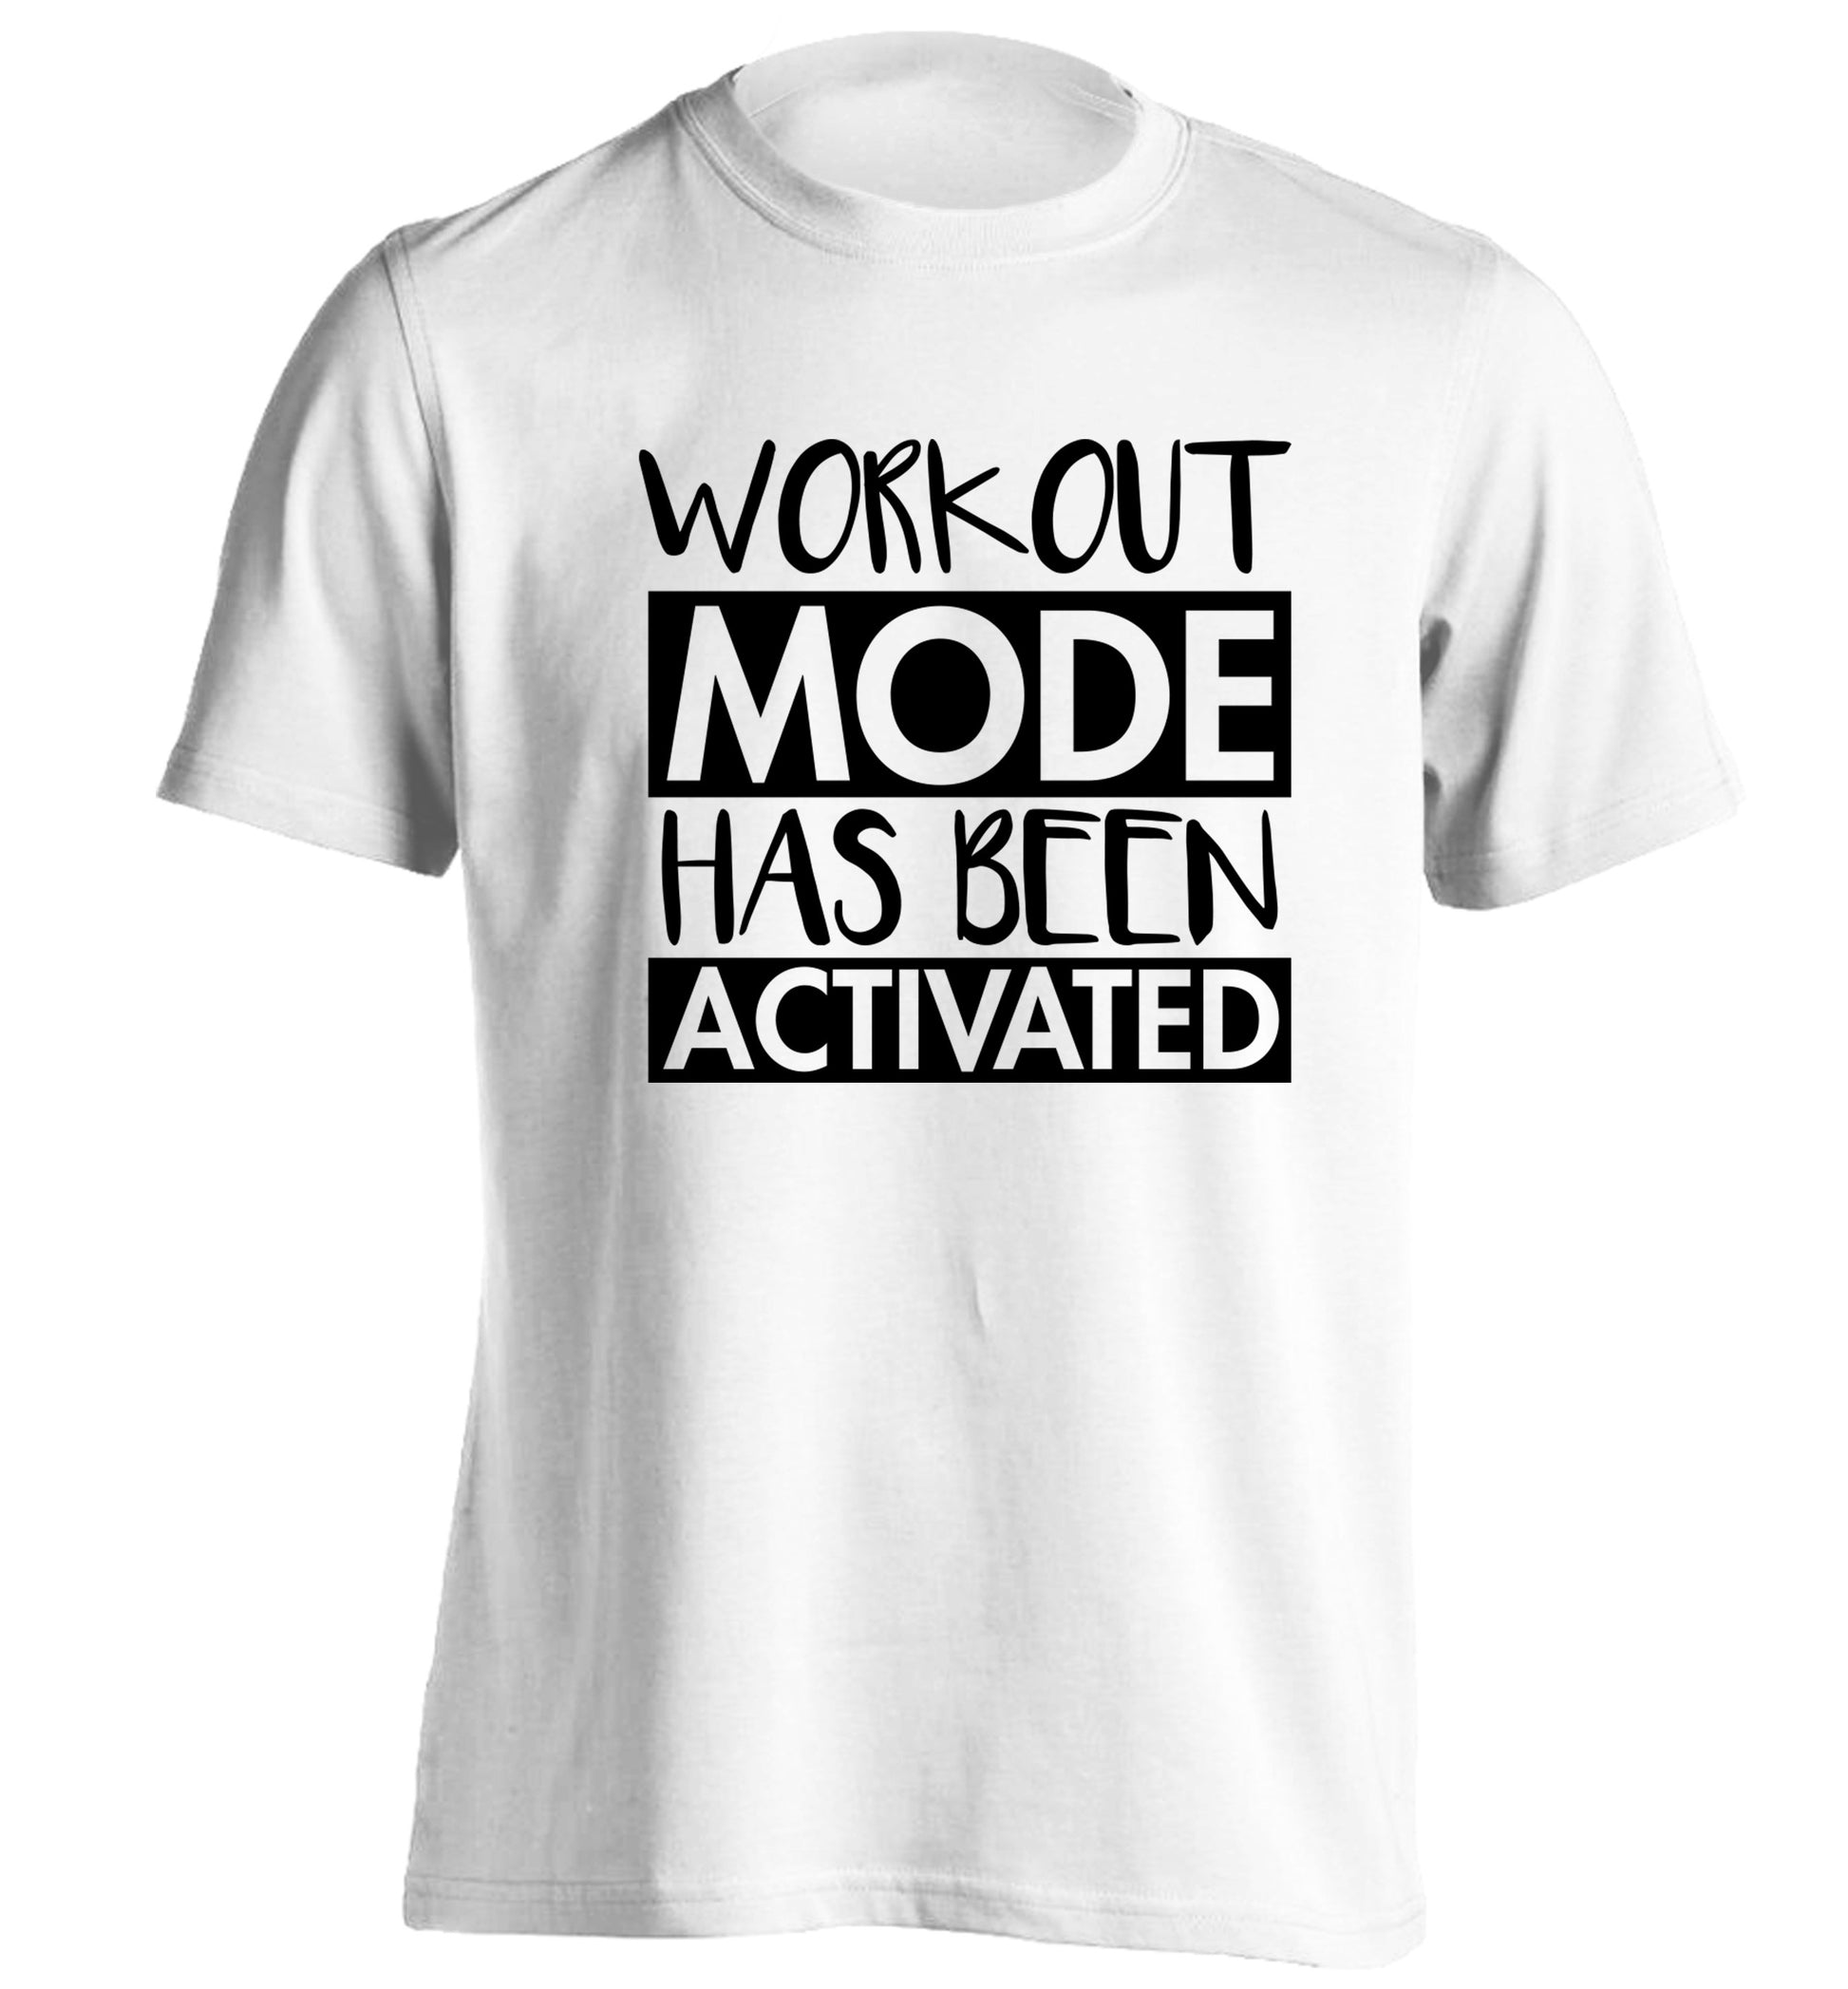 Workout mode has been activated adults unisex white Tshirt 2XL